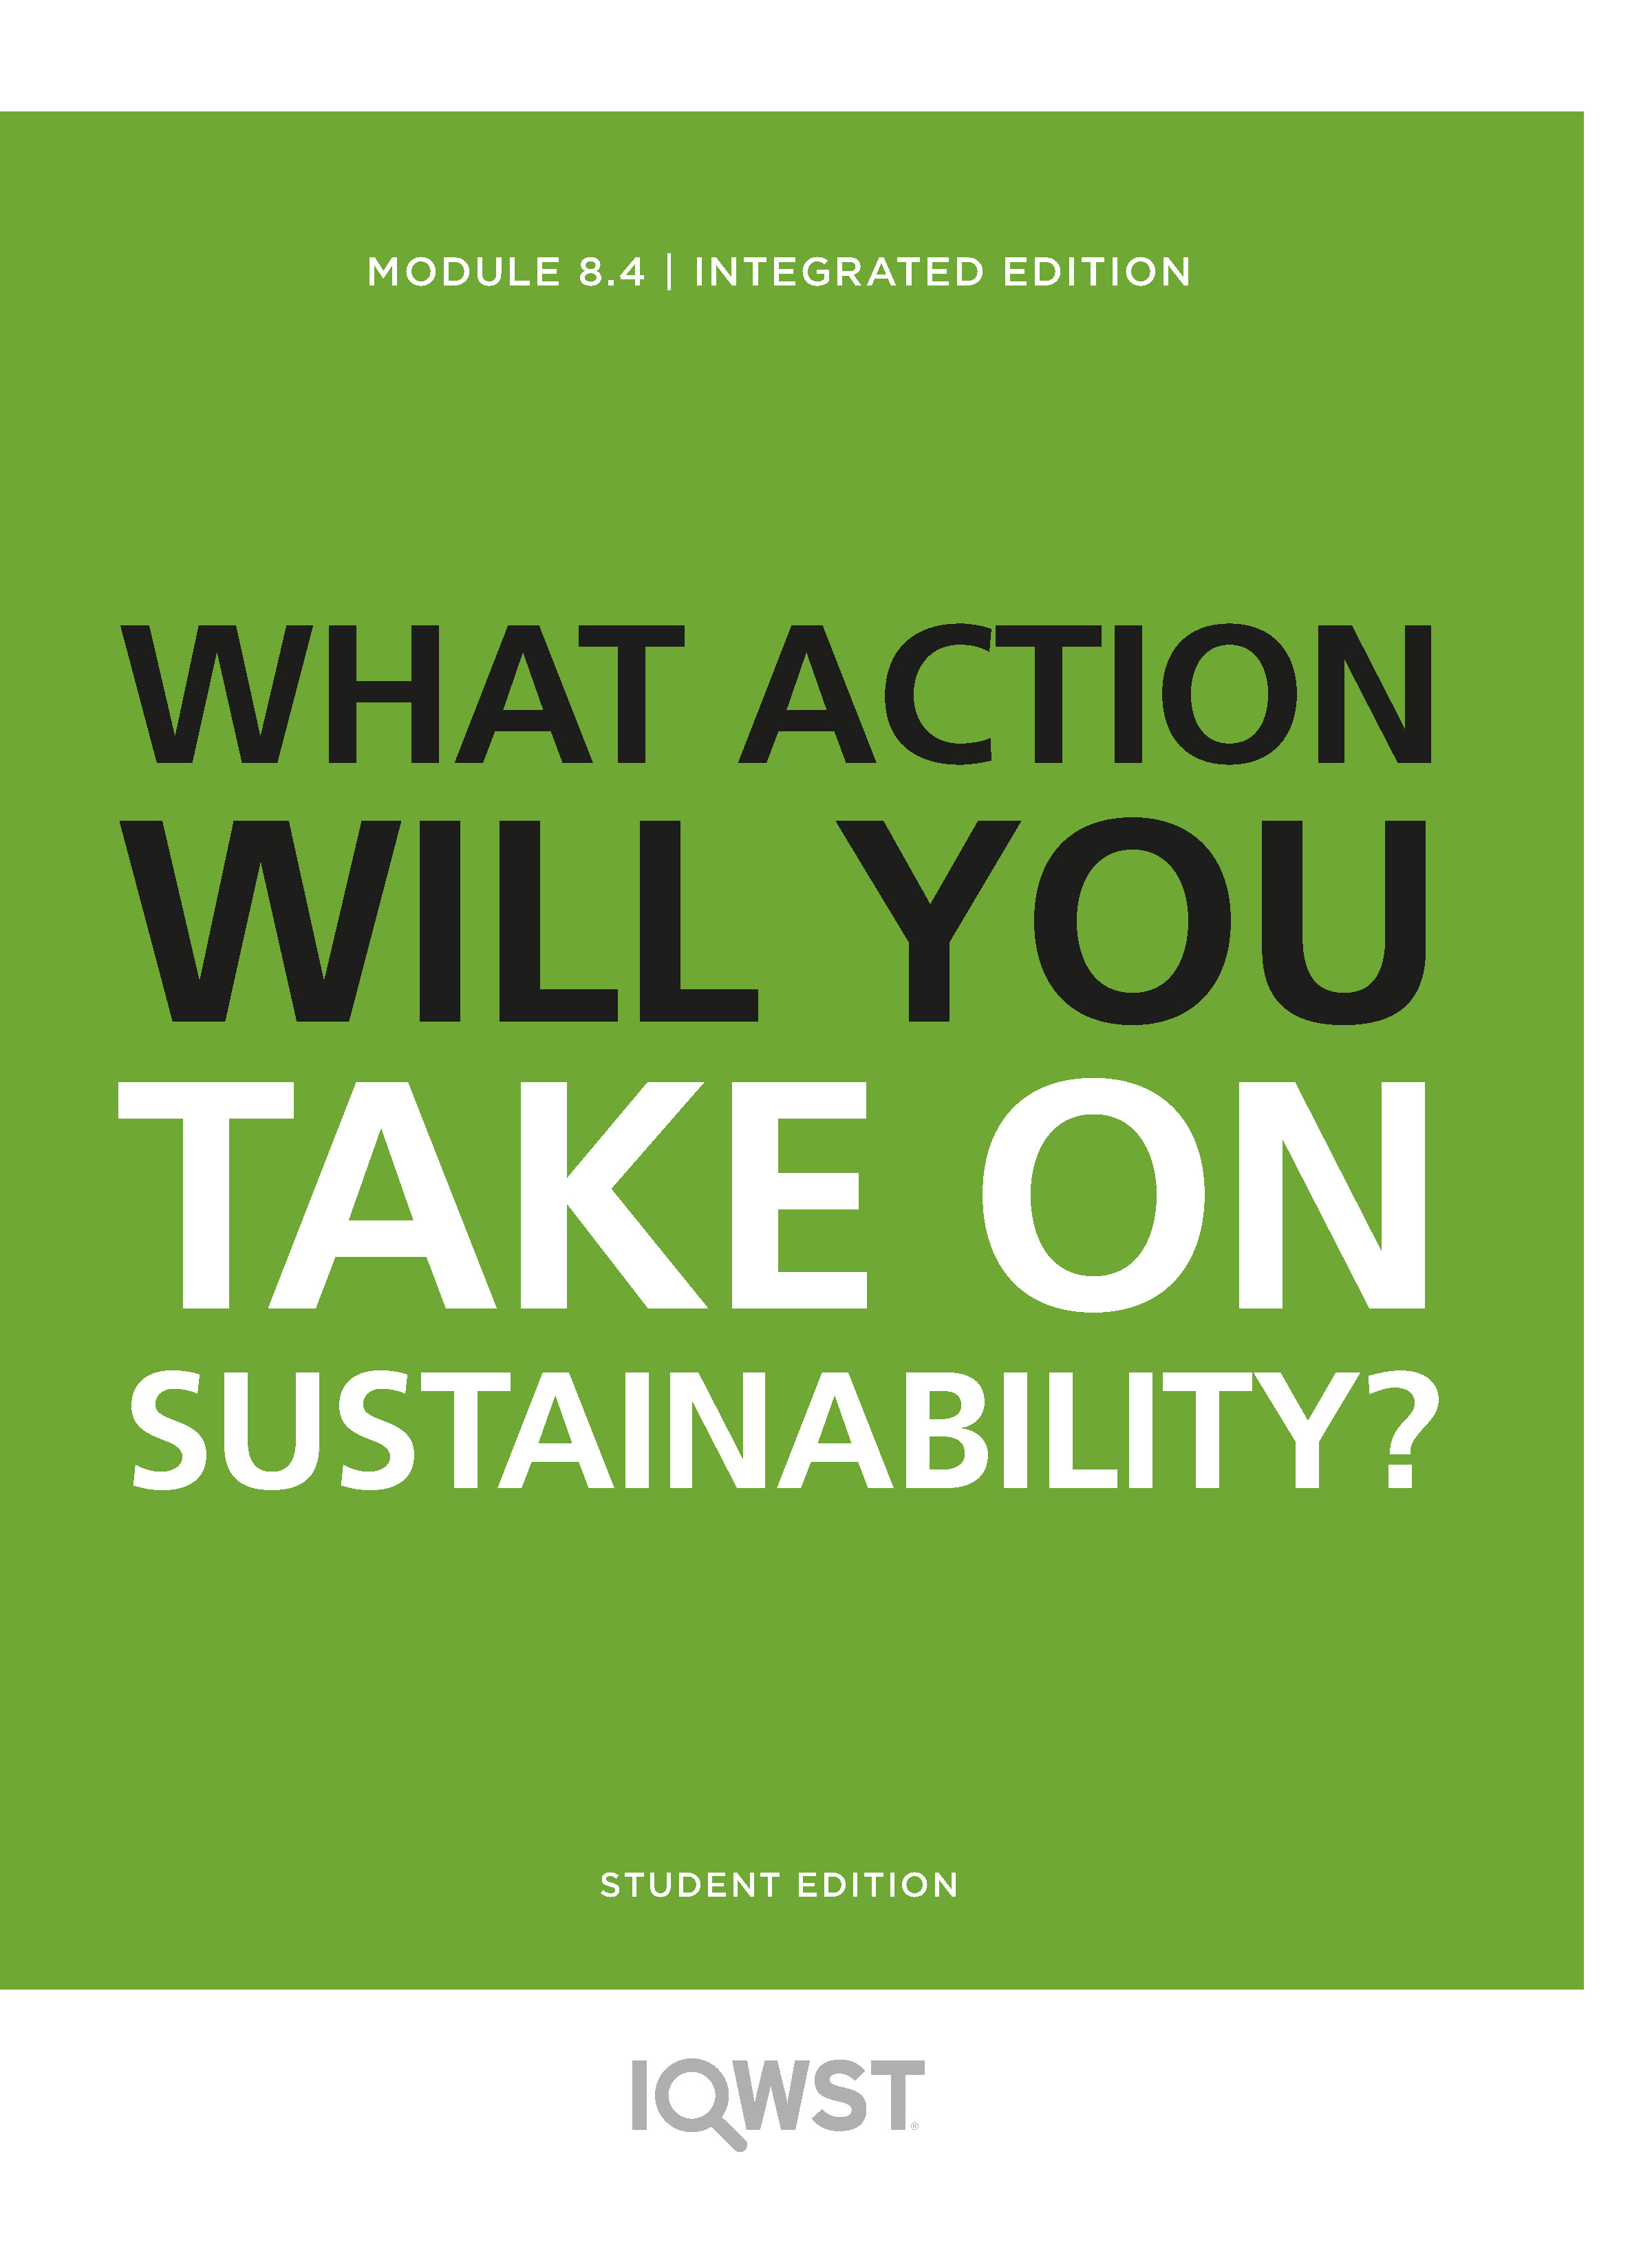 8.4 On What Issues of Sustainability Will You Take Action?